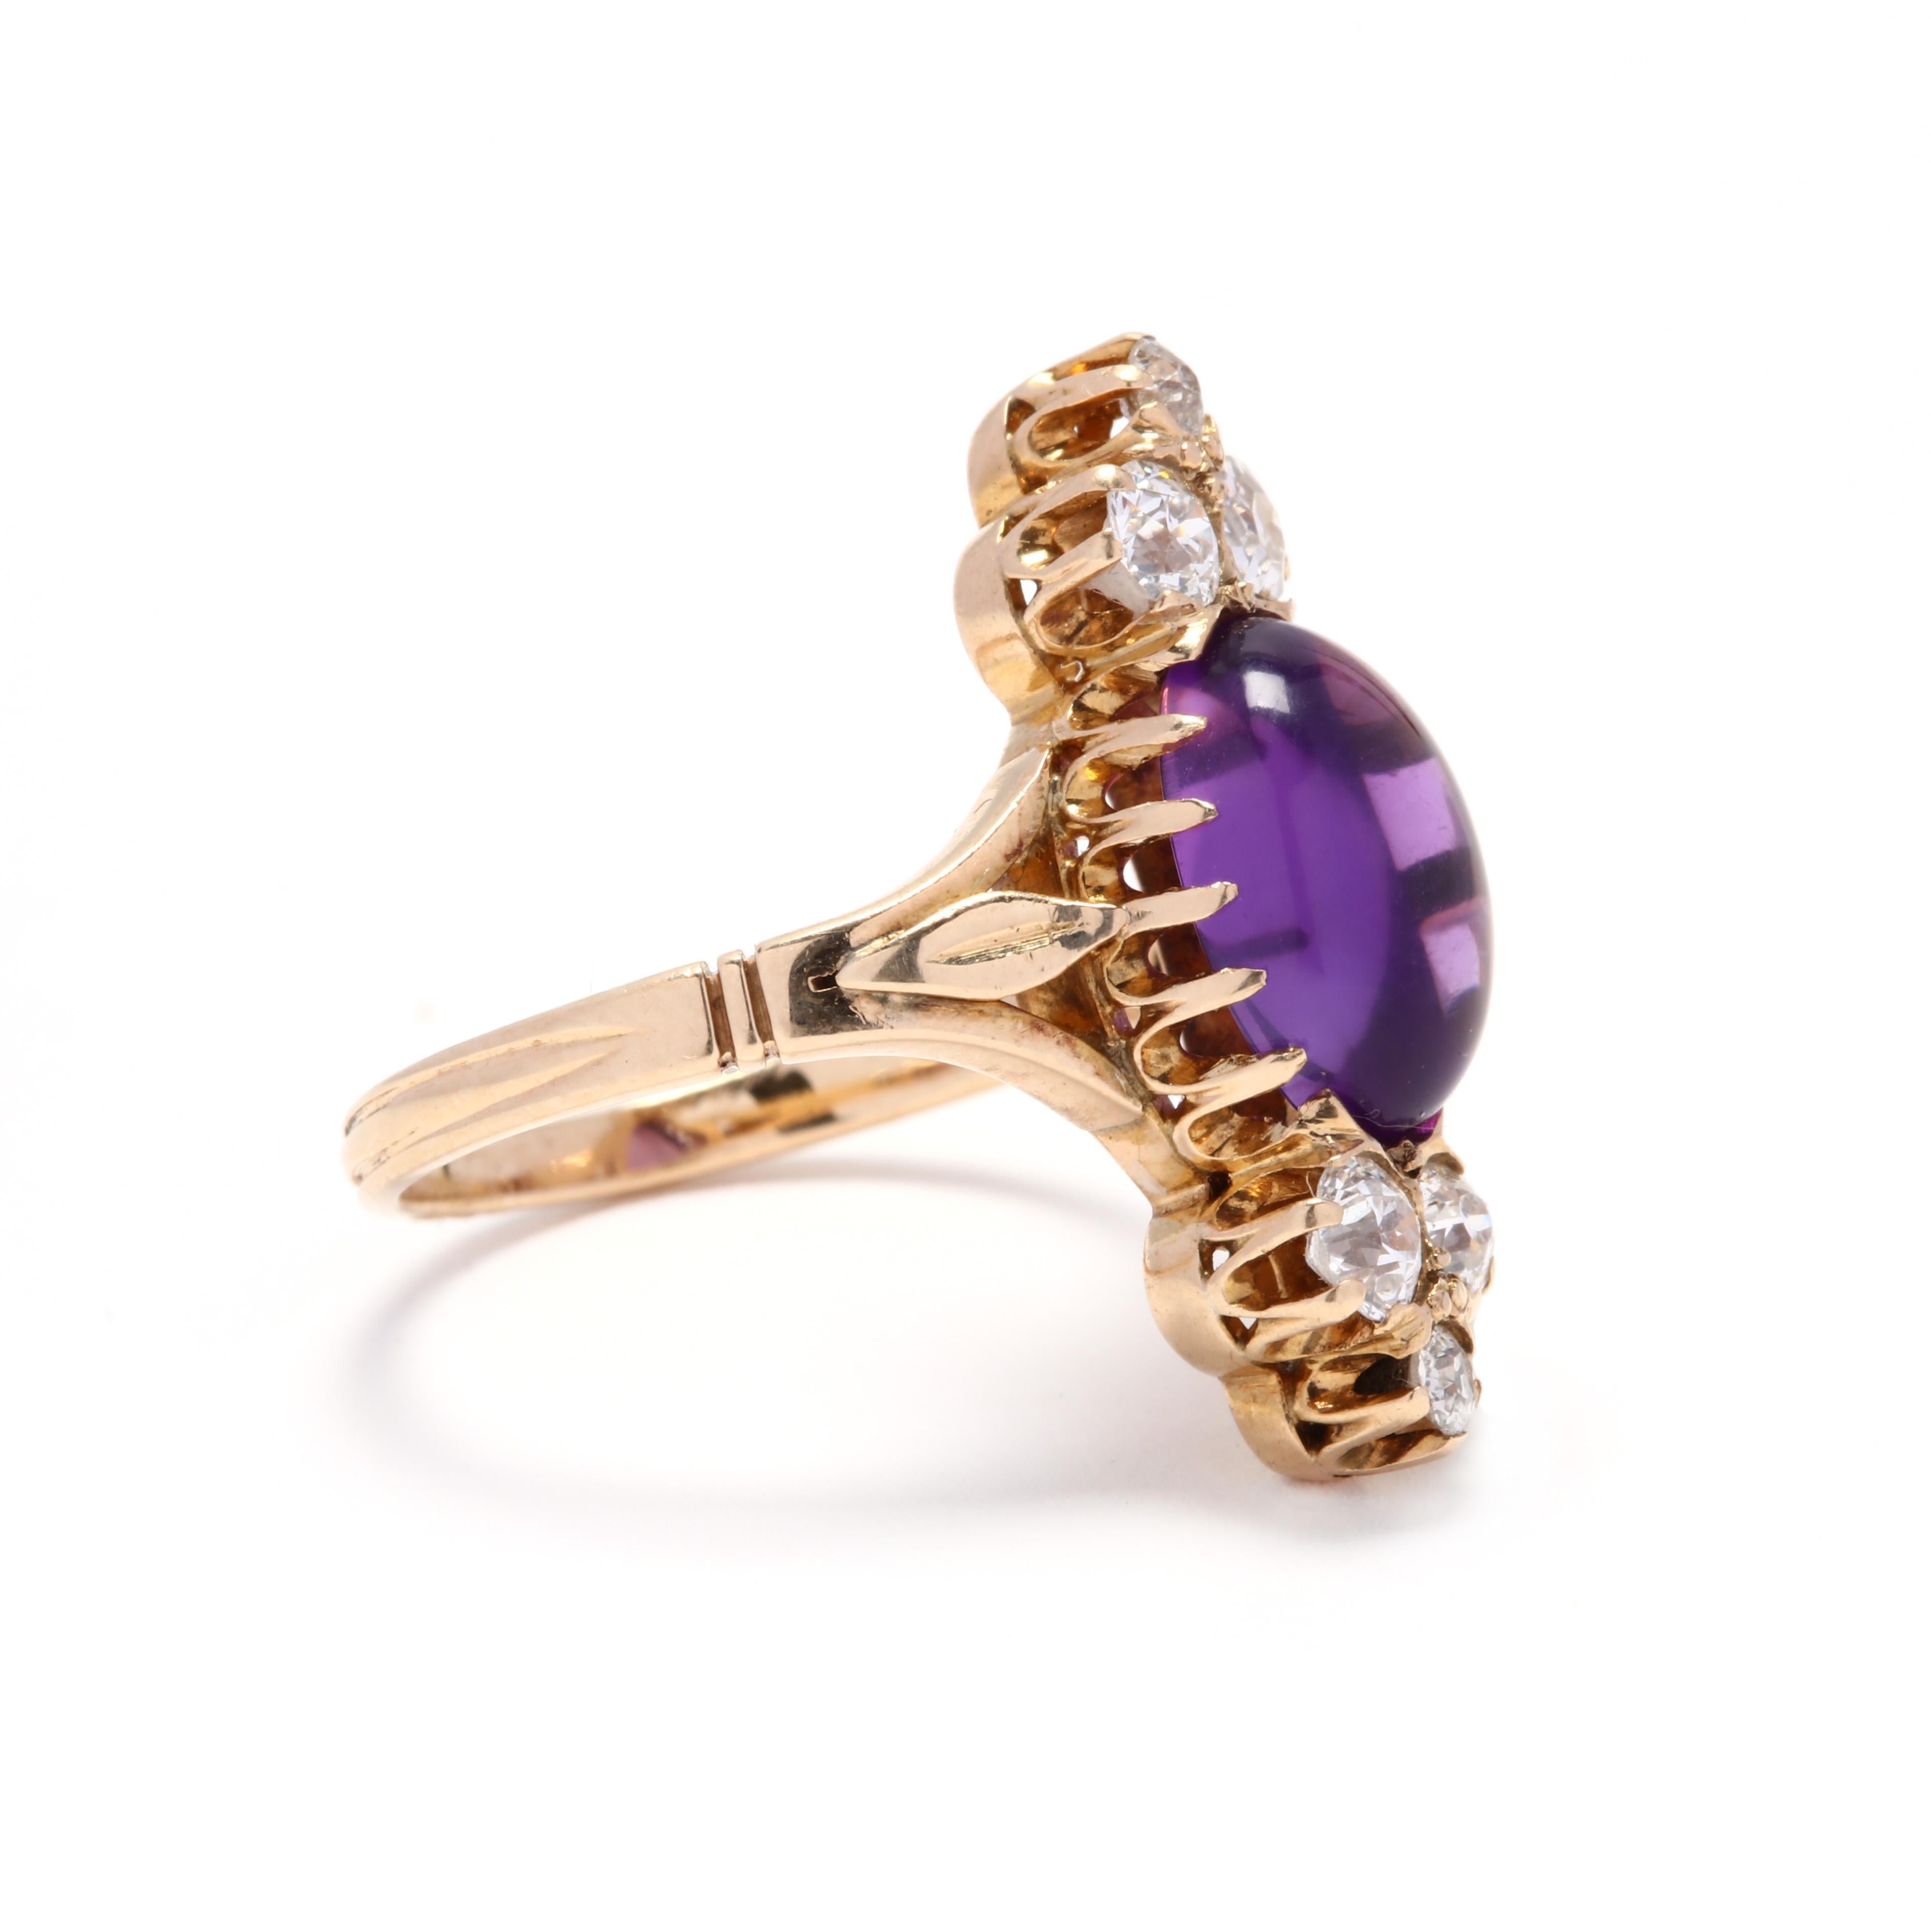 A Victorian 14 karat yellow gold, amethyst and diamond navette ring. This ring features a prong set, oval cabochon amethyst weighing approximately 2.77 carats with a trefoil design of old European cut diamonds weighing approximately .68 total carats